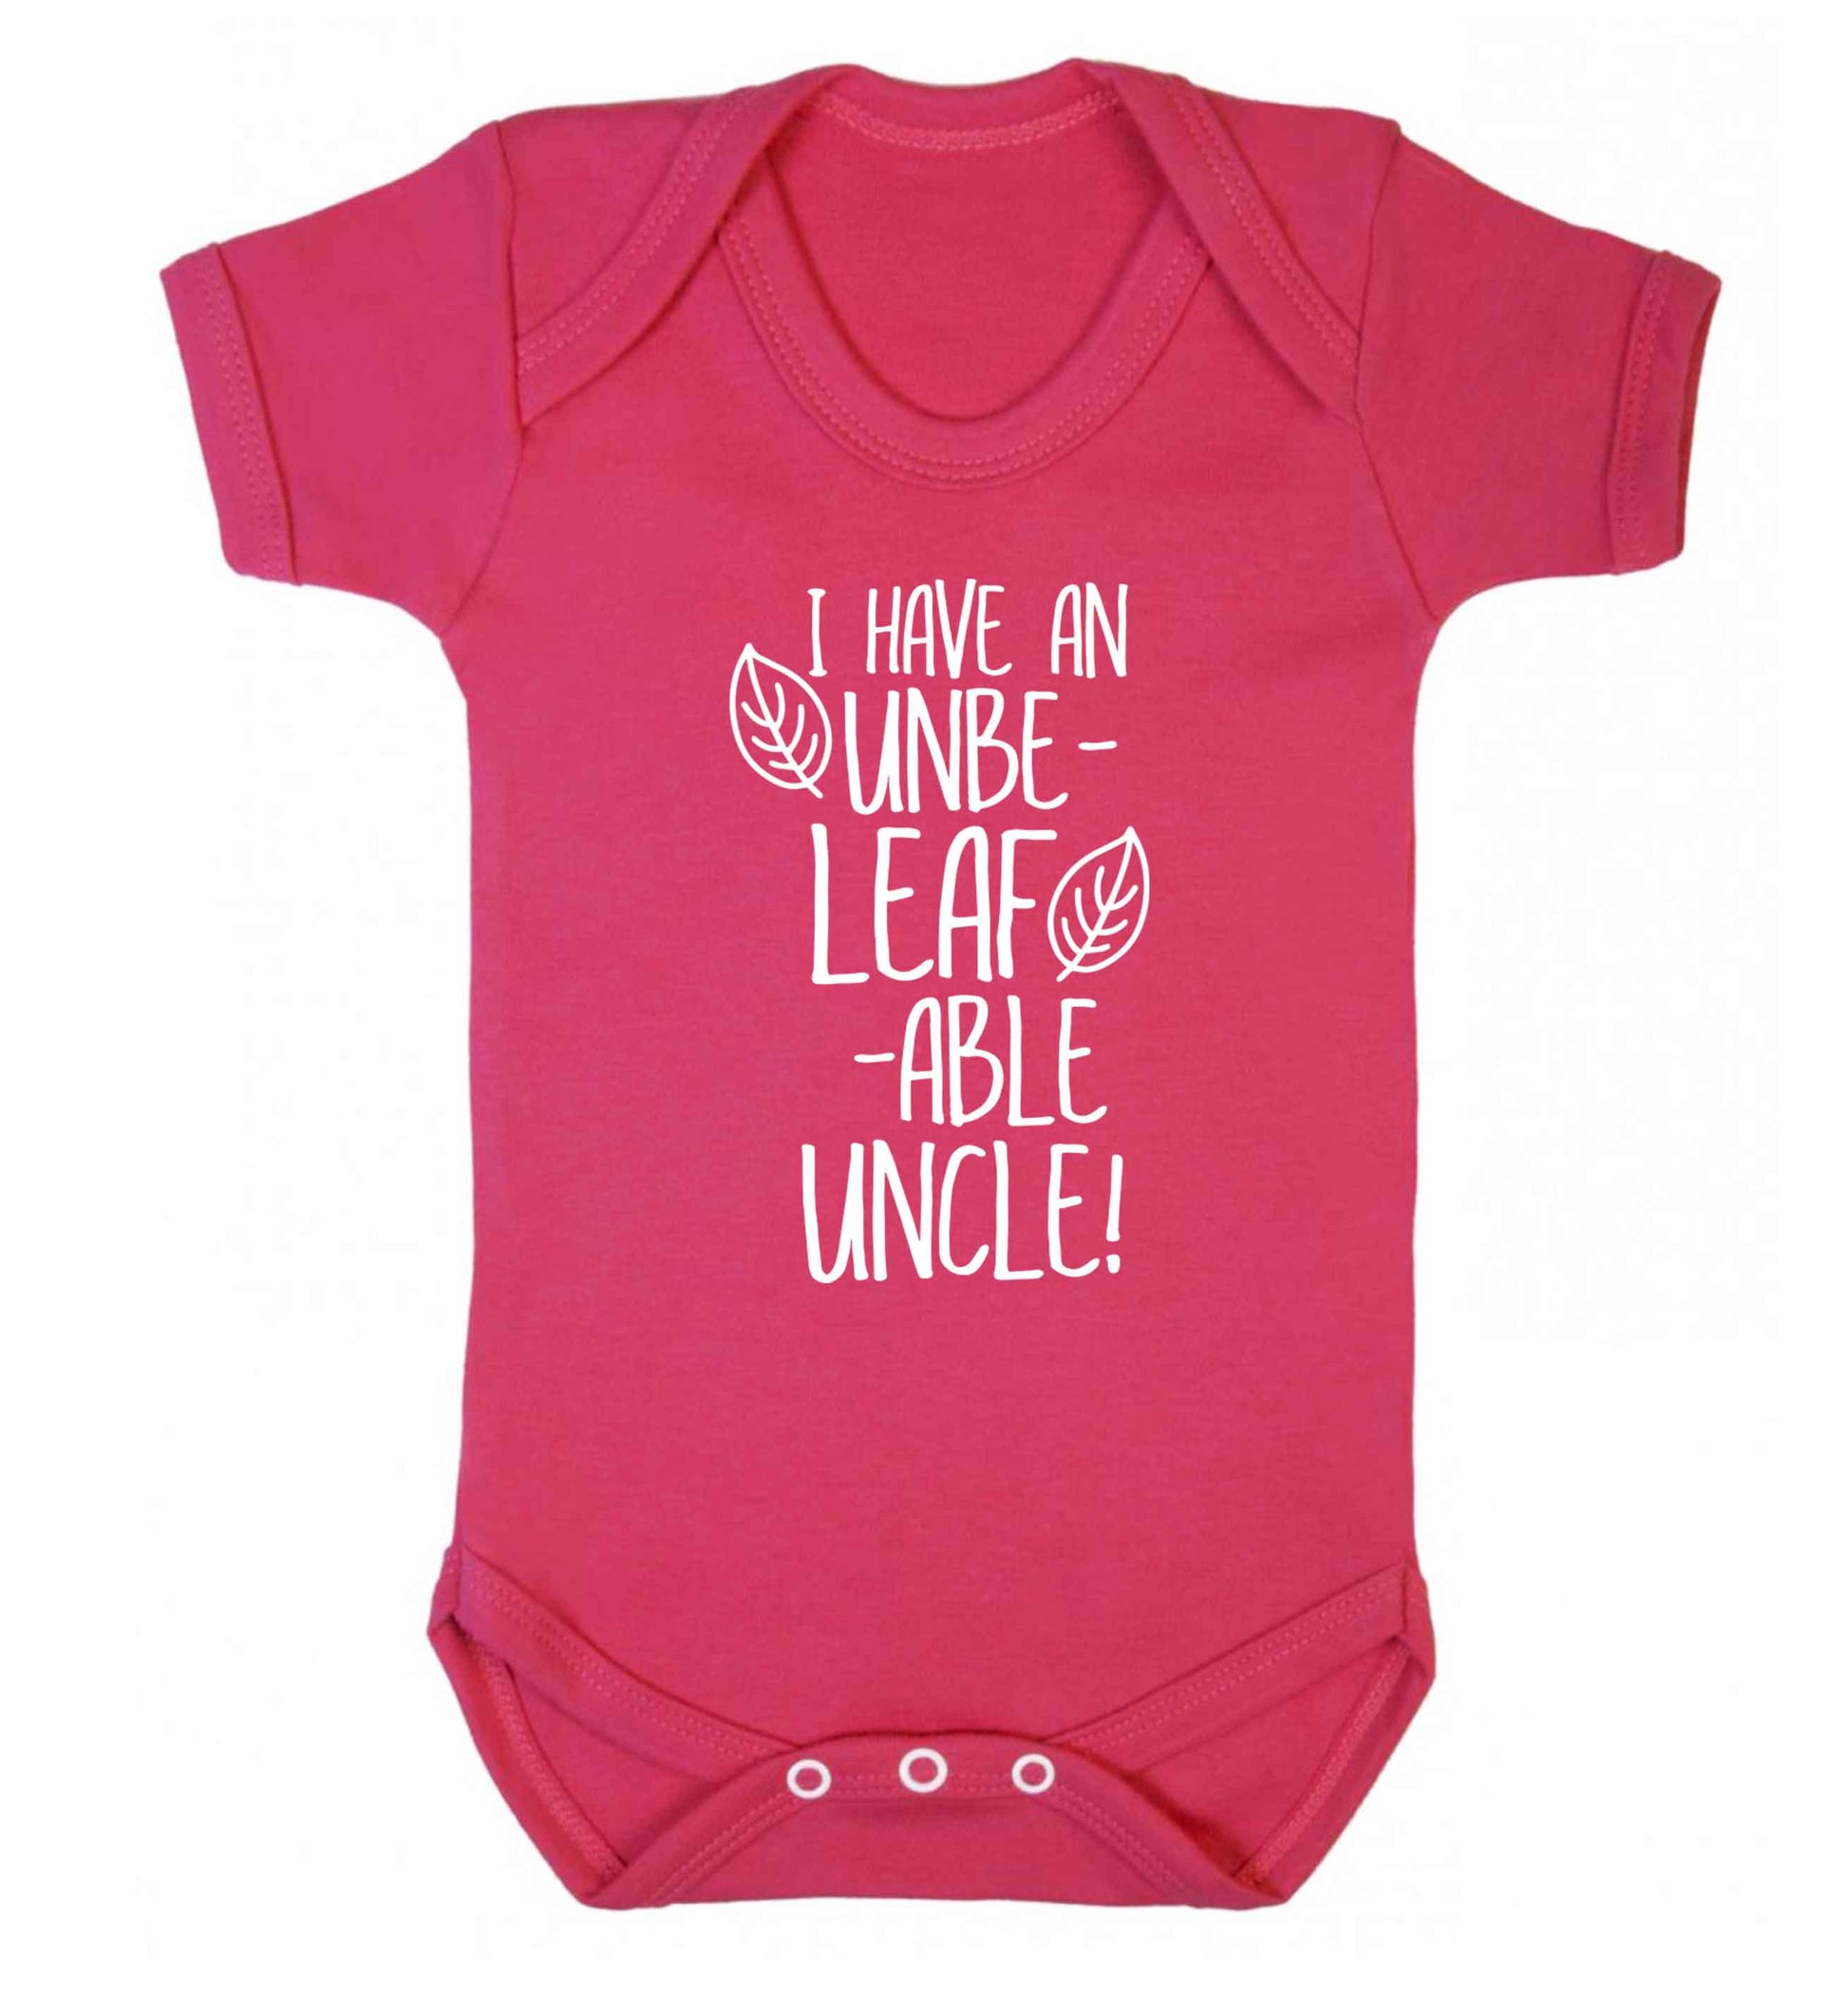 I have an unbe-leaf-able uncle Baby Vest dark pink 18-24 months